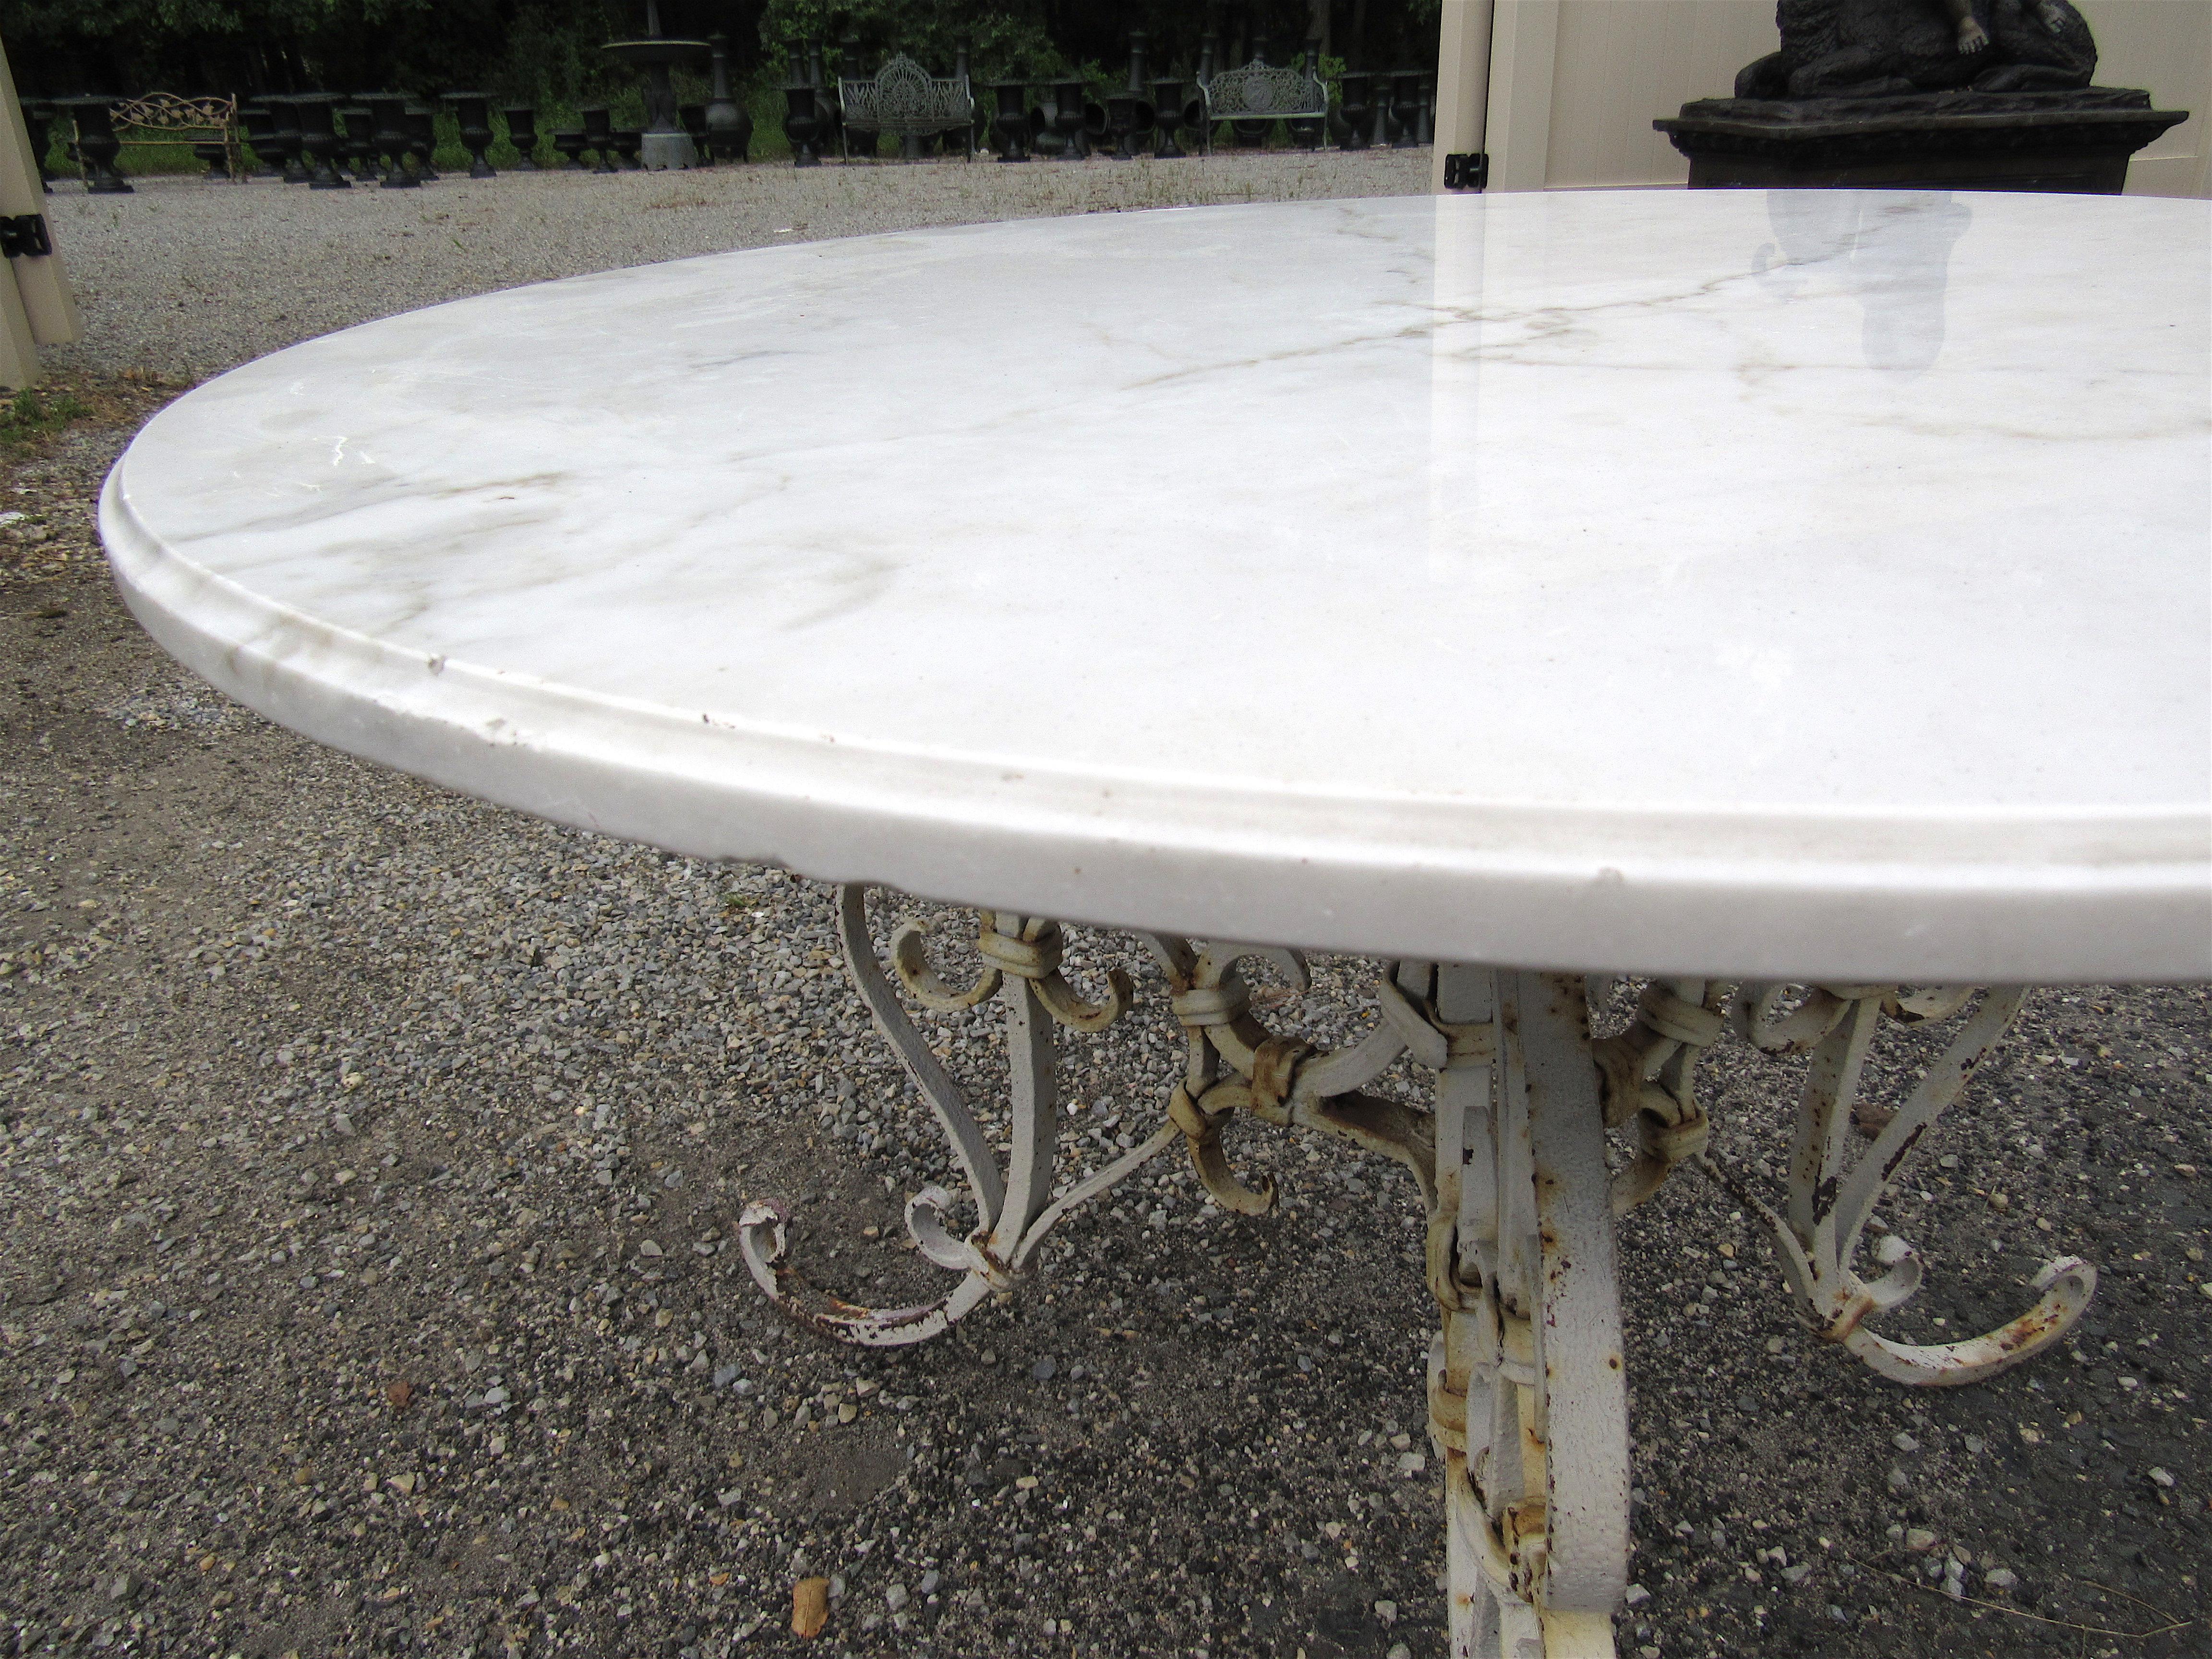 Impressive vintage marble-top patio table. Stylish ornate iron base. This table would make an excellent addition to any patio/outdoor area's decor. Please confirm item location with dealer (NJ or NY).